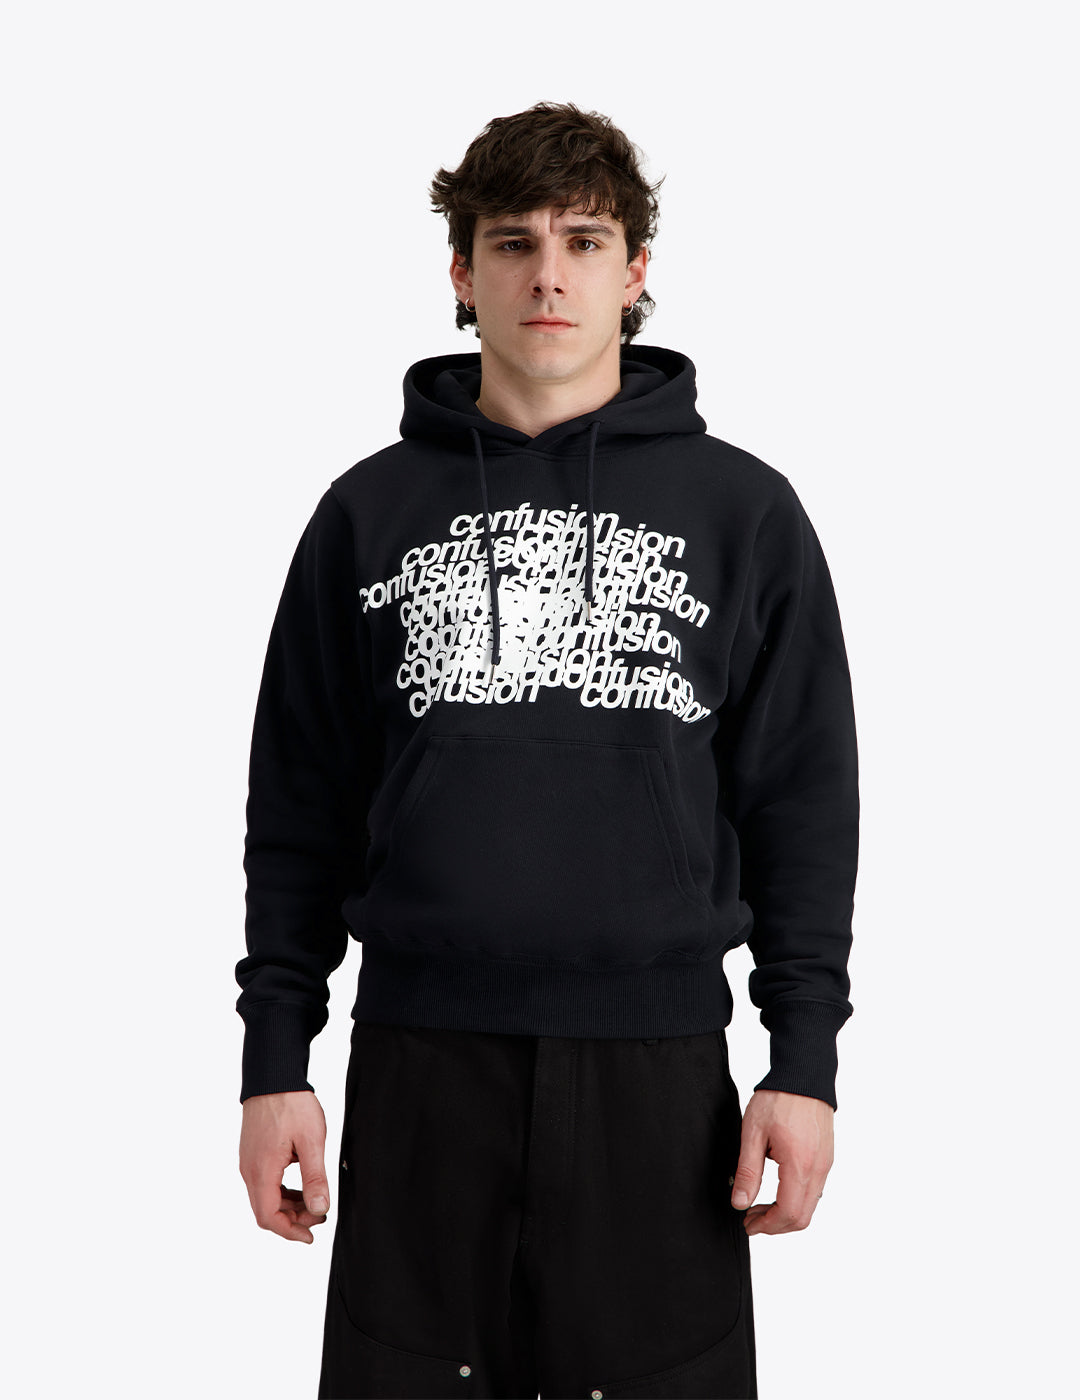 THE "CONFUSION" PRINTED HOODIE